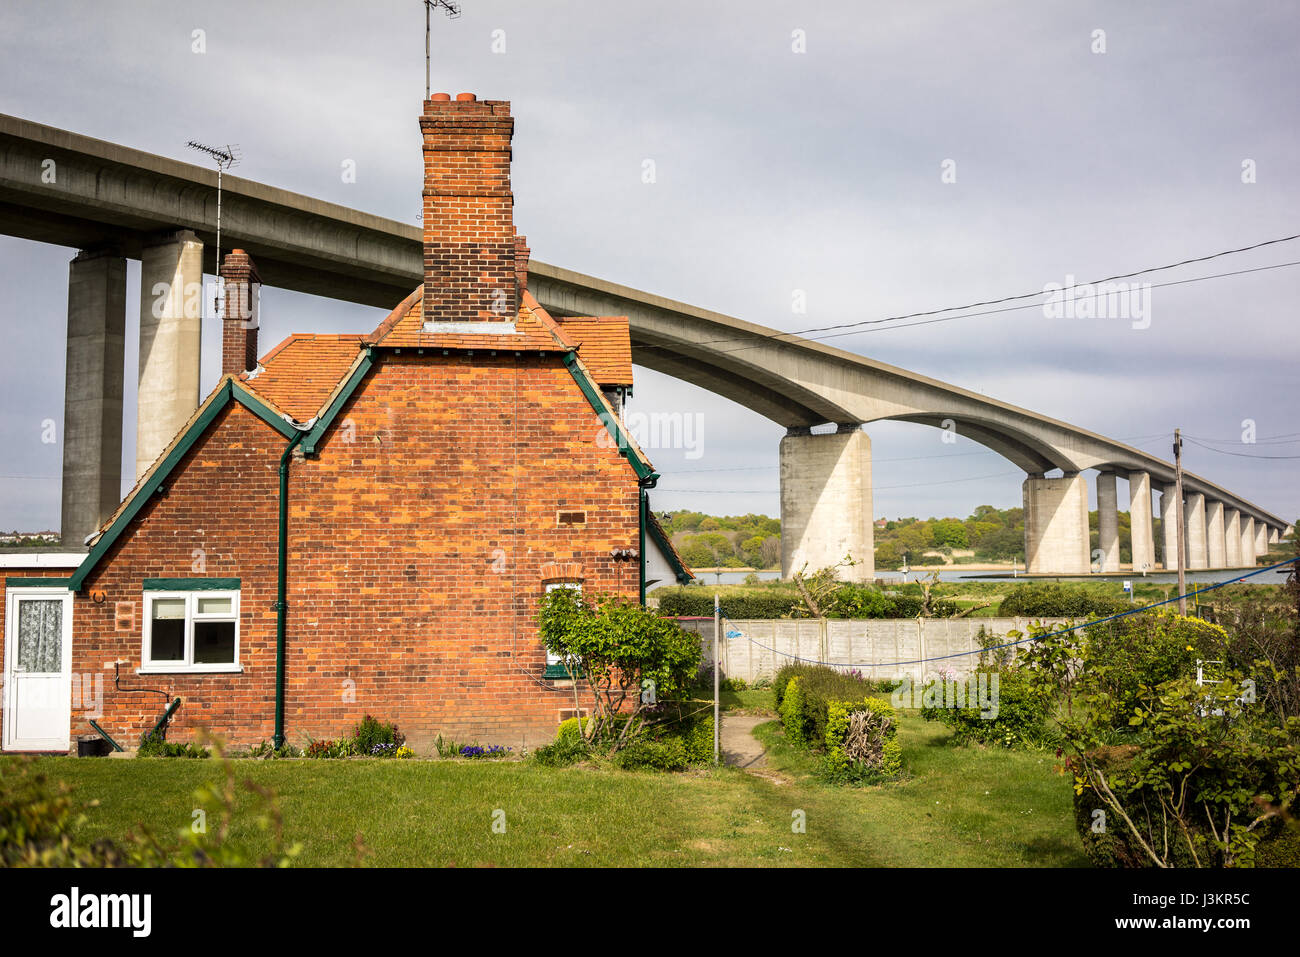 The Orwell Bridge opened to road traffic in 1982 and carries the A14 (then A45) over the River Orwell just south of Ipswich in Suffolk, England. Stock Photo